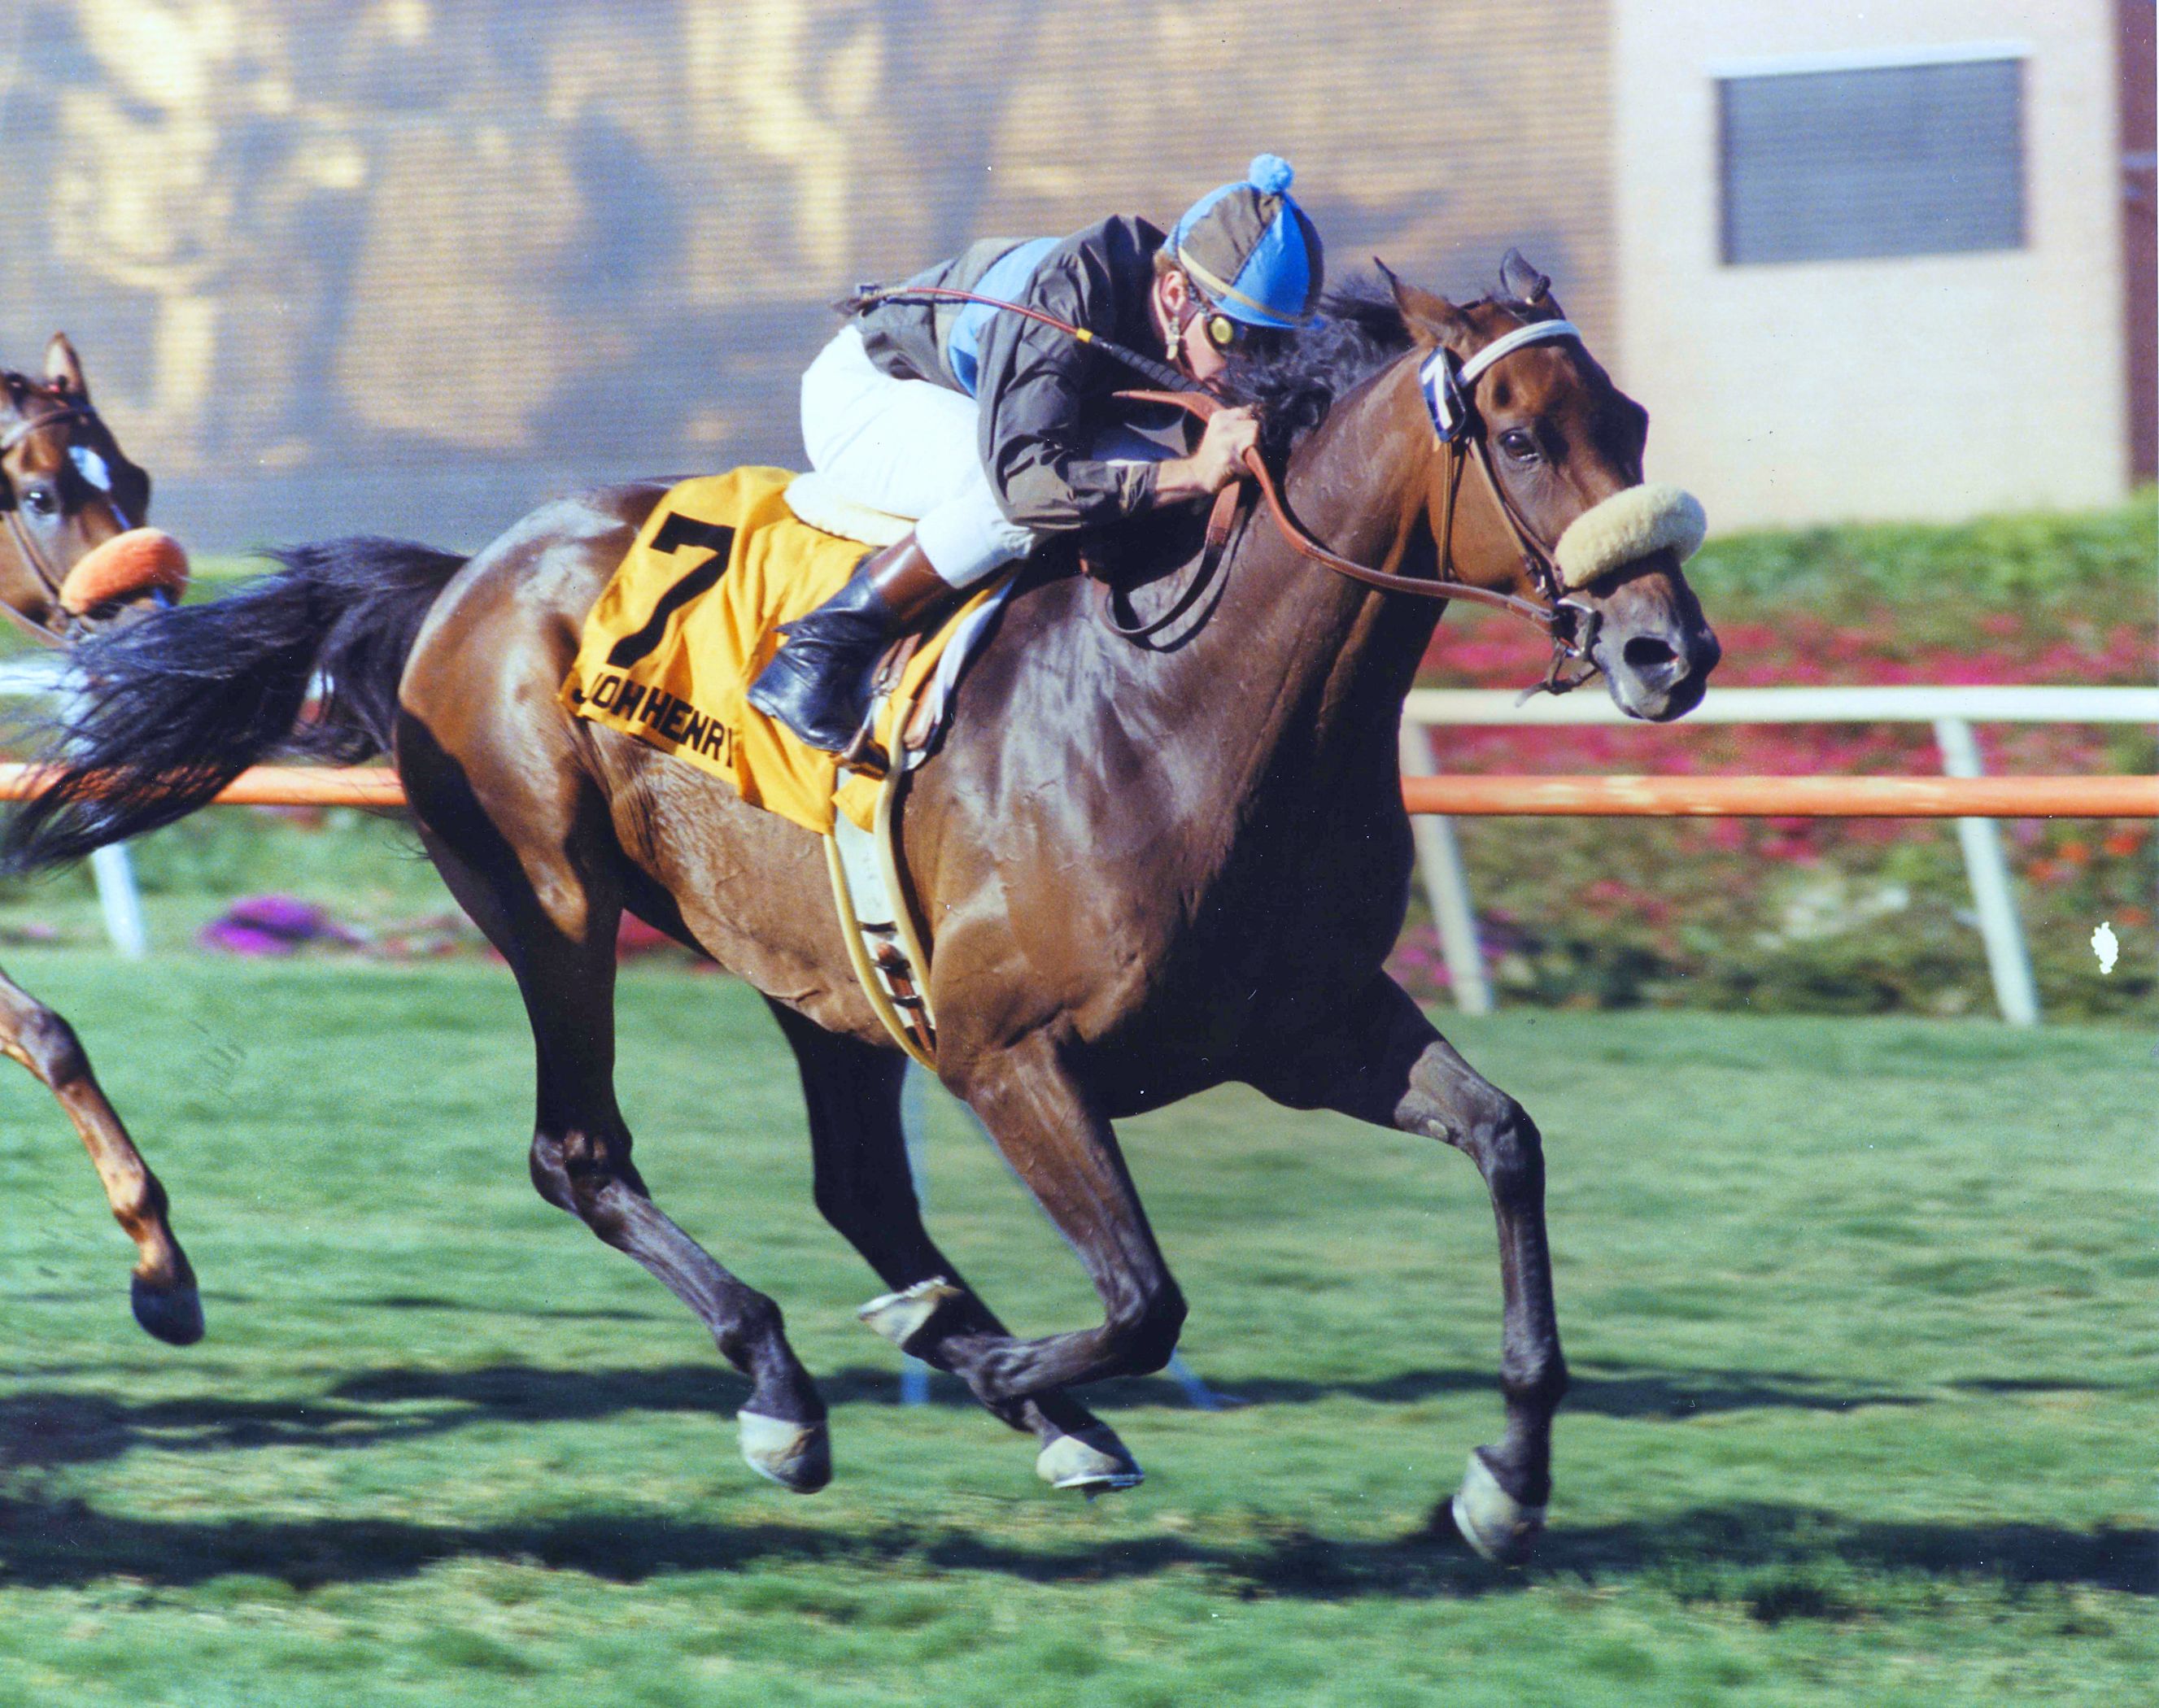 John Henry (Chris McCarron up) winning the 1984 Sunset Handicap at Hollywood Park (Hollywood Park Photo/Museum Collection)